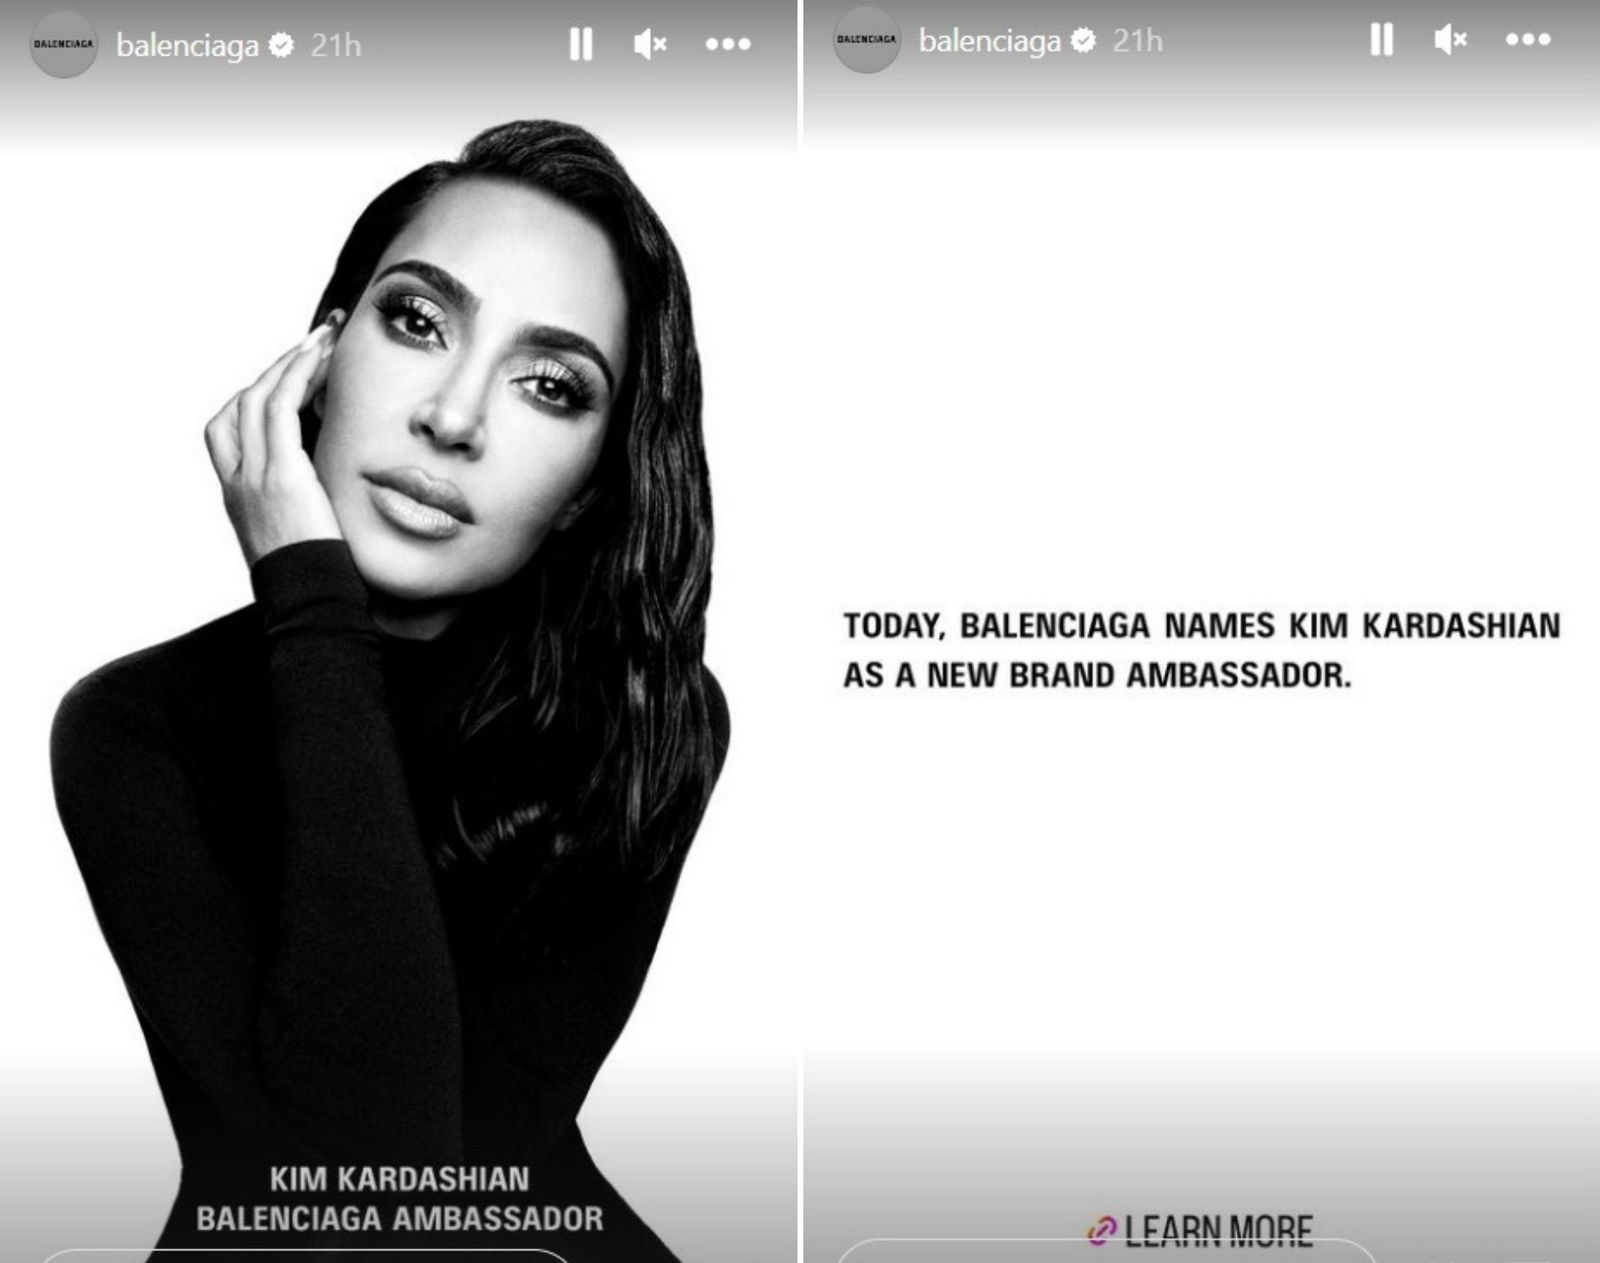 Ringing in the new year with style, Kim Kardashian has made a glamorous  comeback as Balenciaga's brand ambassador, leaving behind last year's  campaign scandal. The luxury fashion world watches as the billionaire